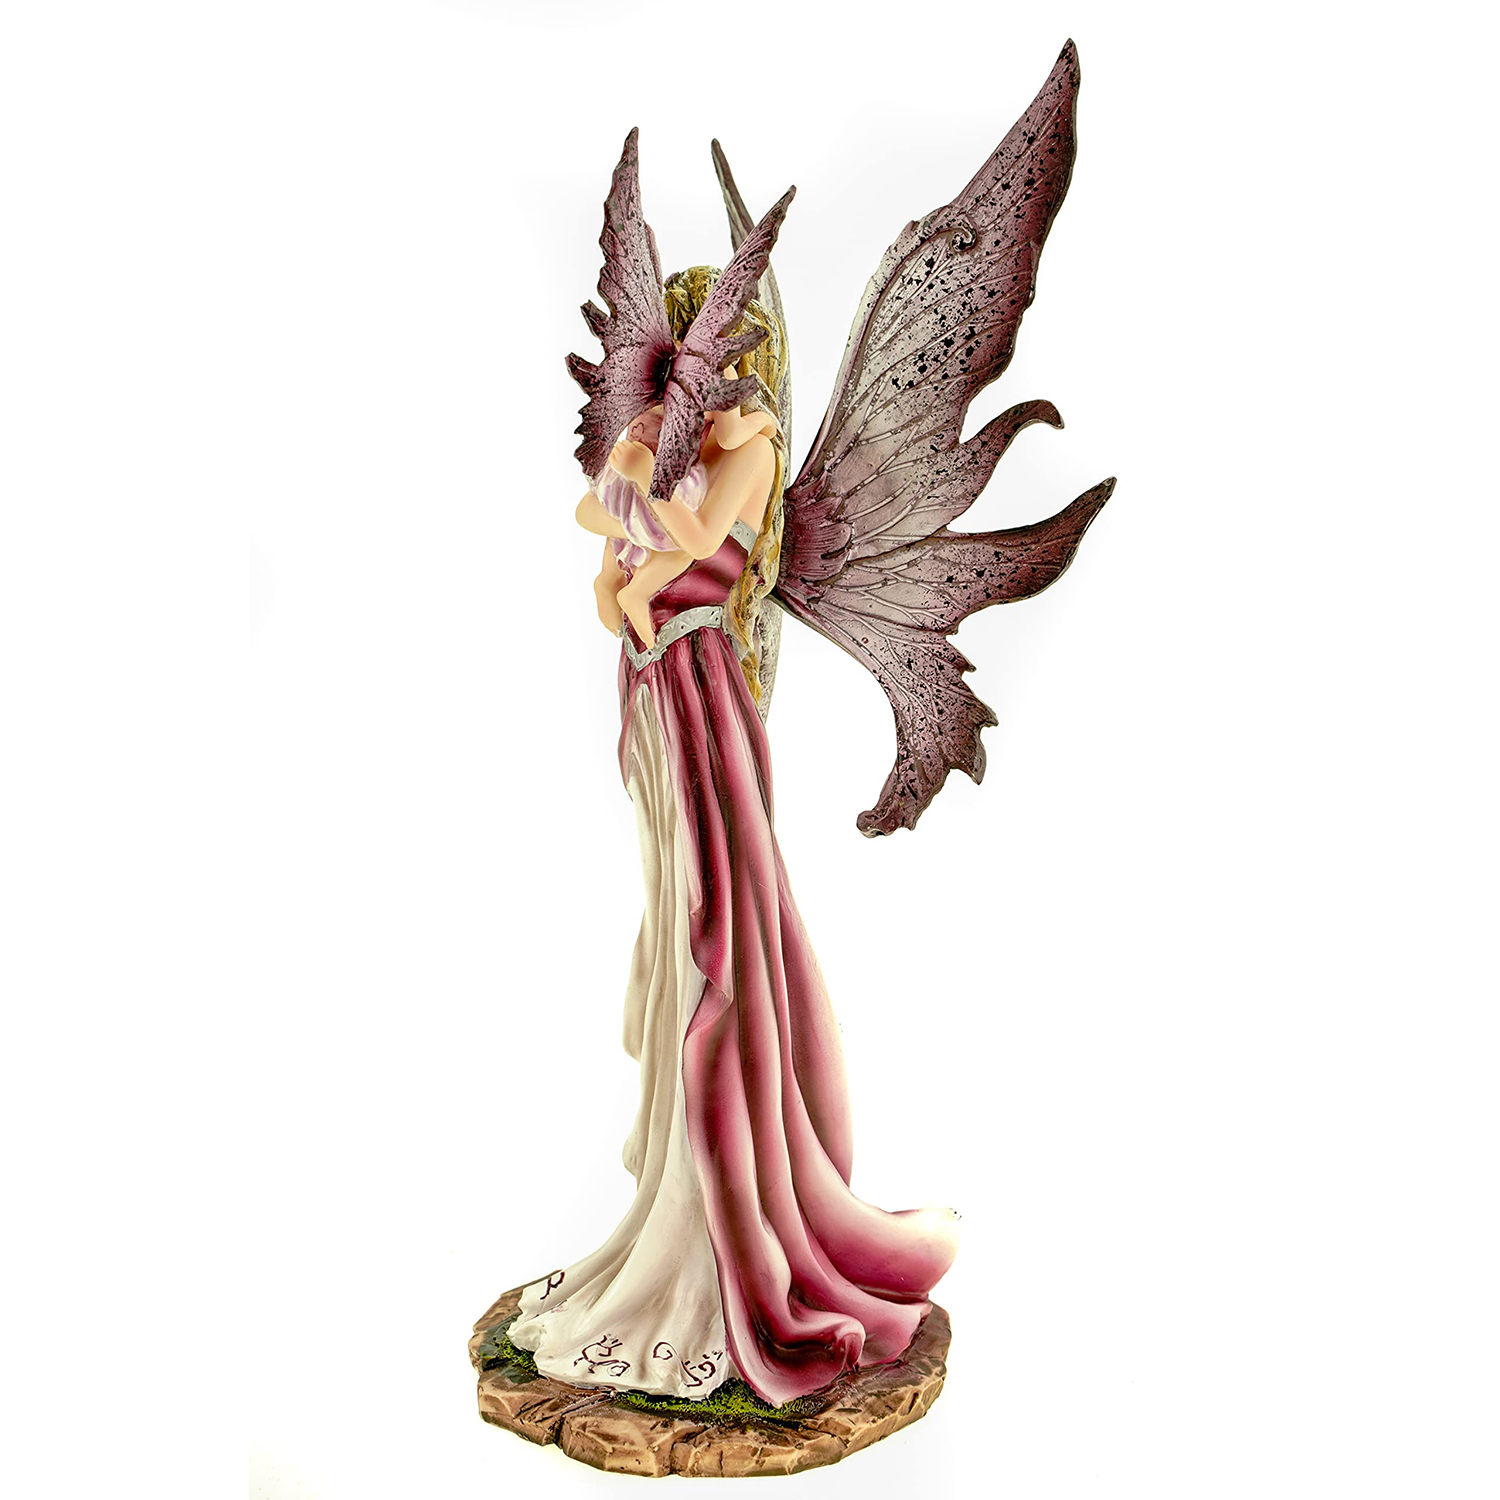 Fairy Figurines for Sale